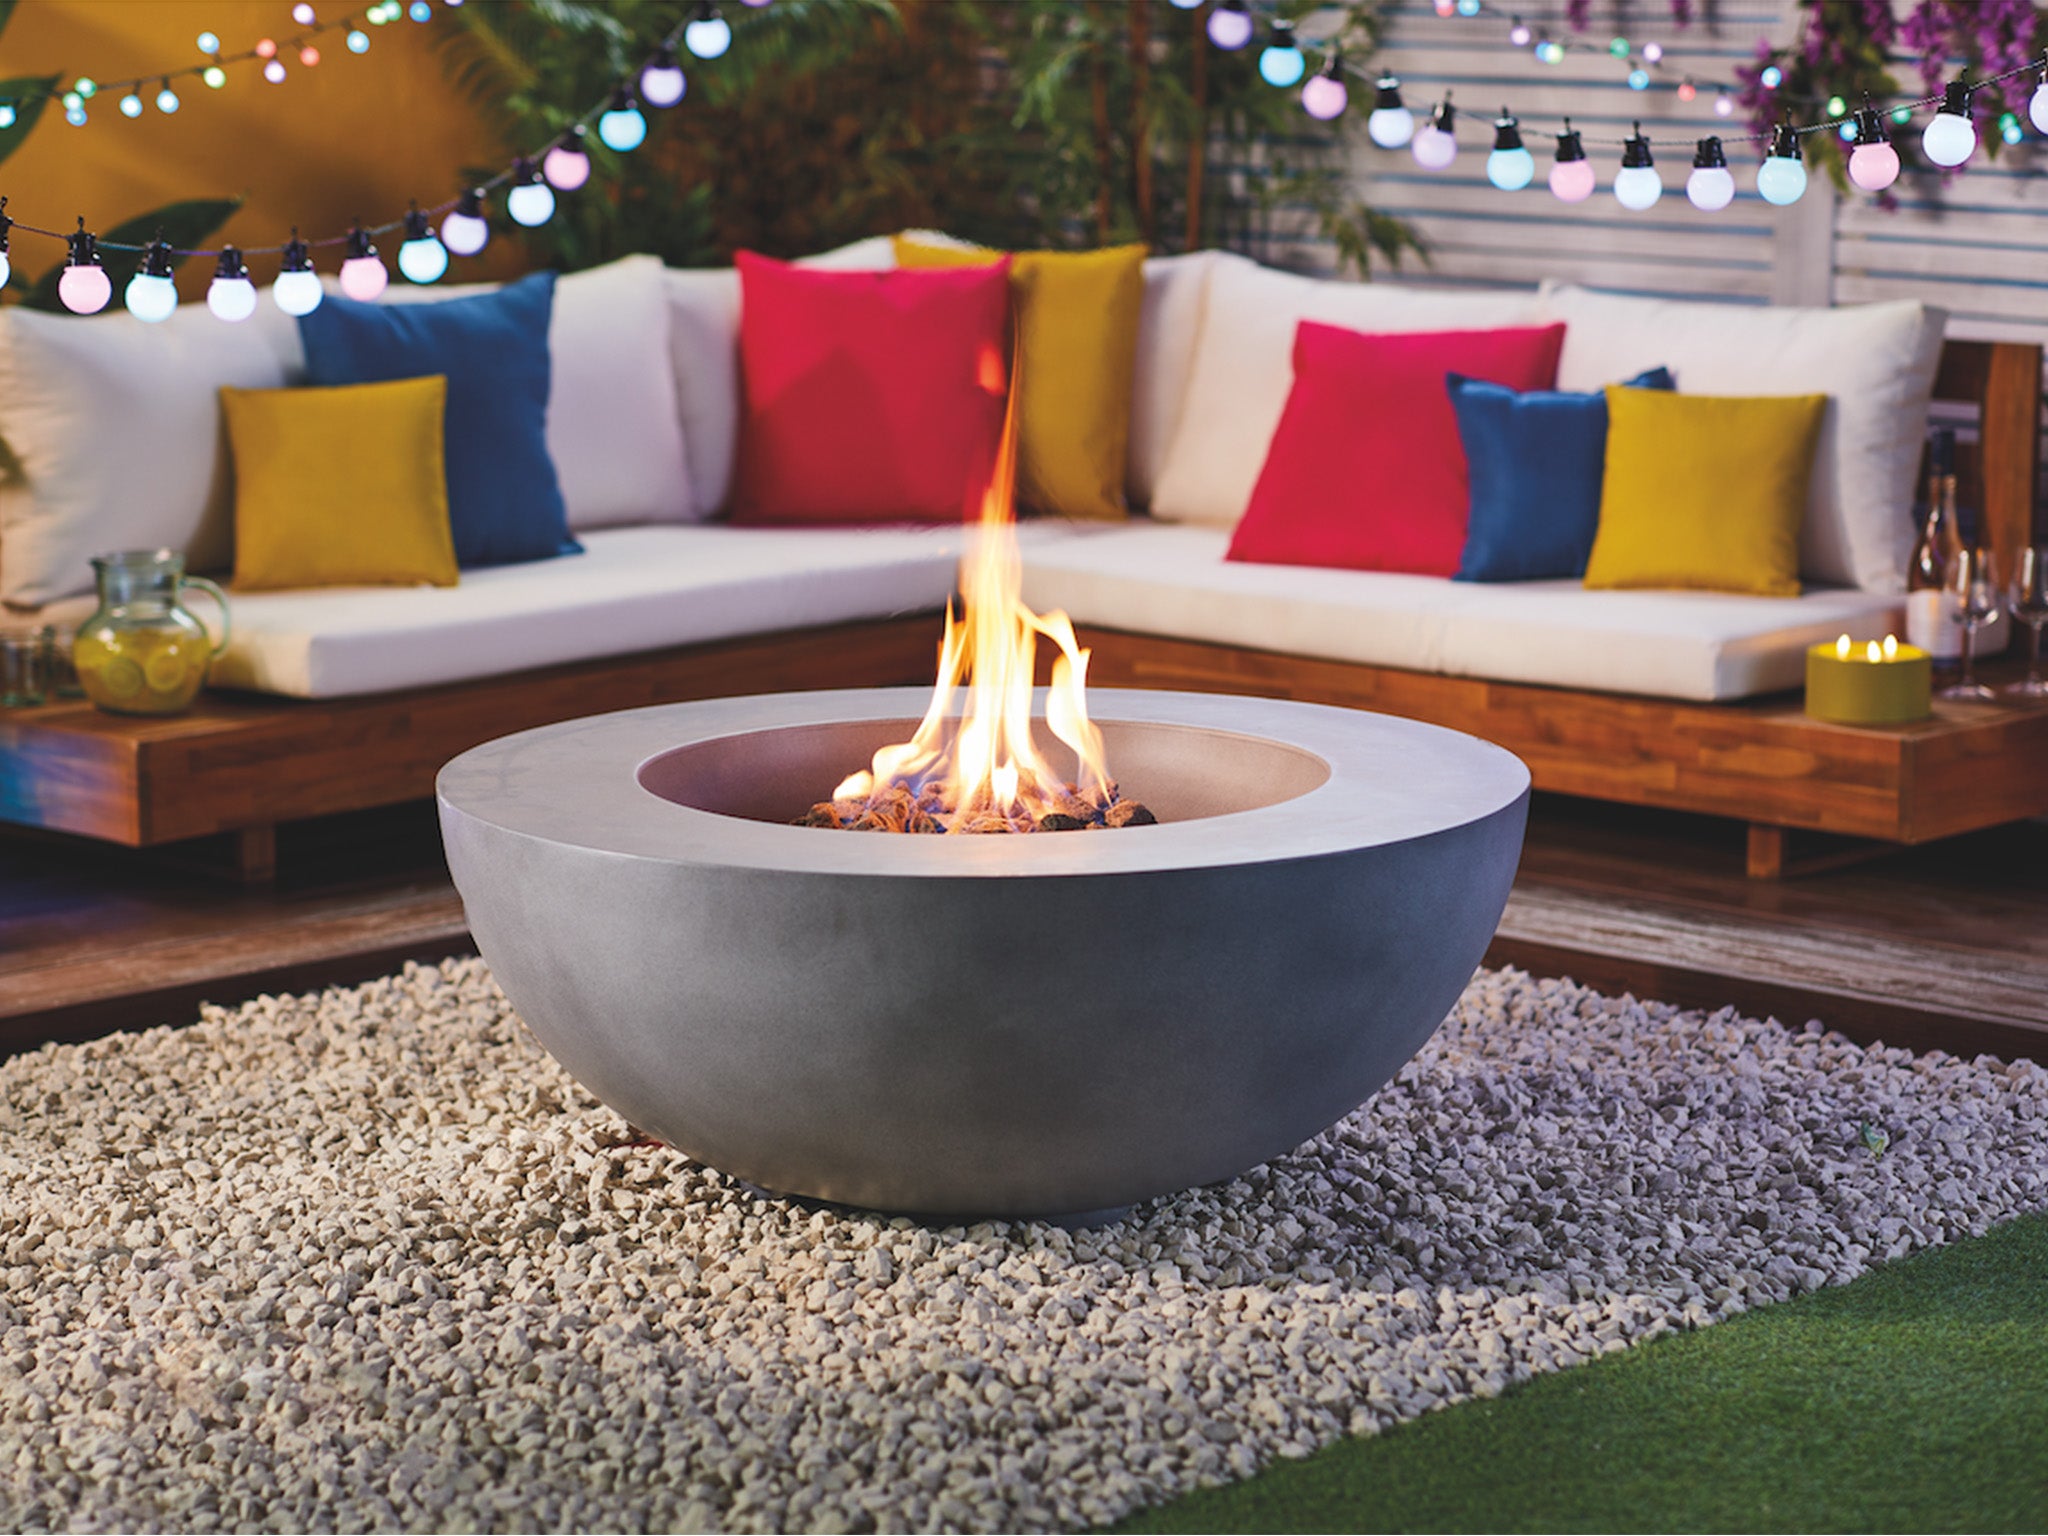 How to incorporate ventilation into your fire pit design